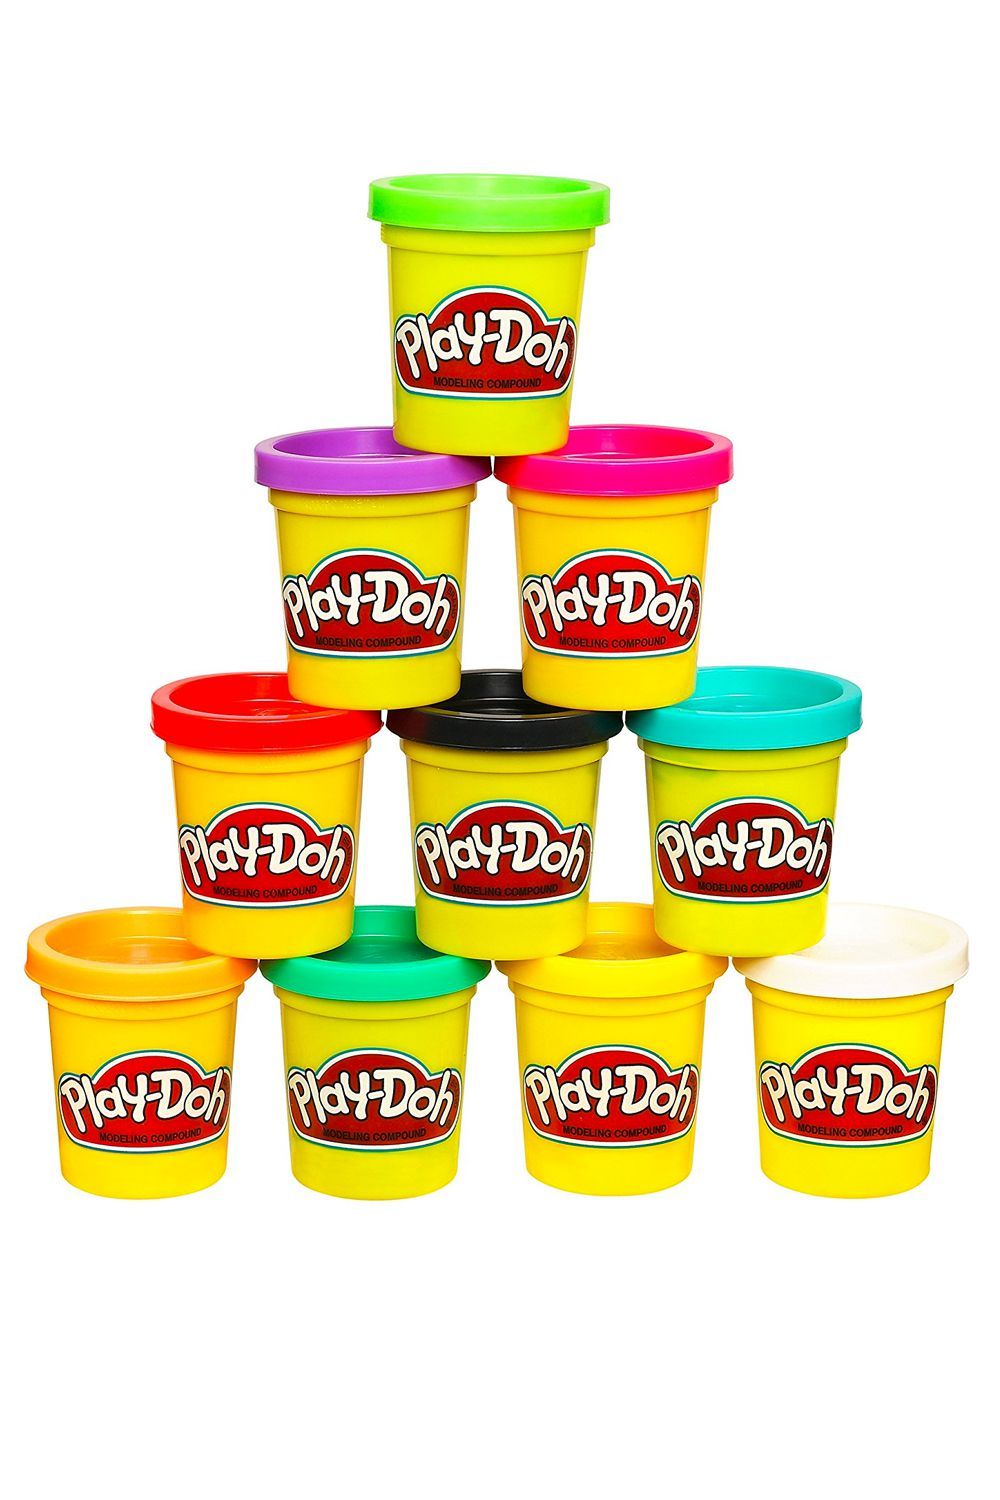 play doh sets for 3 year olds